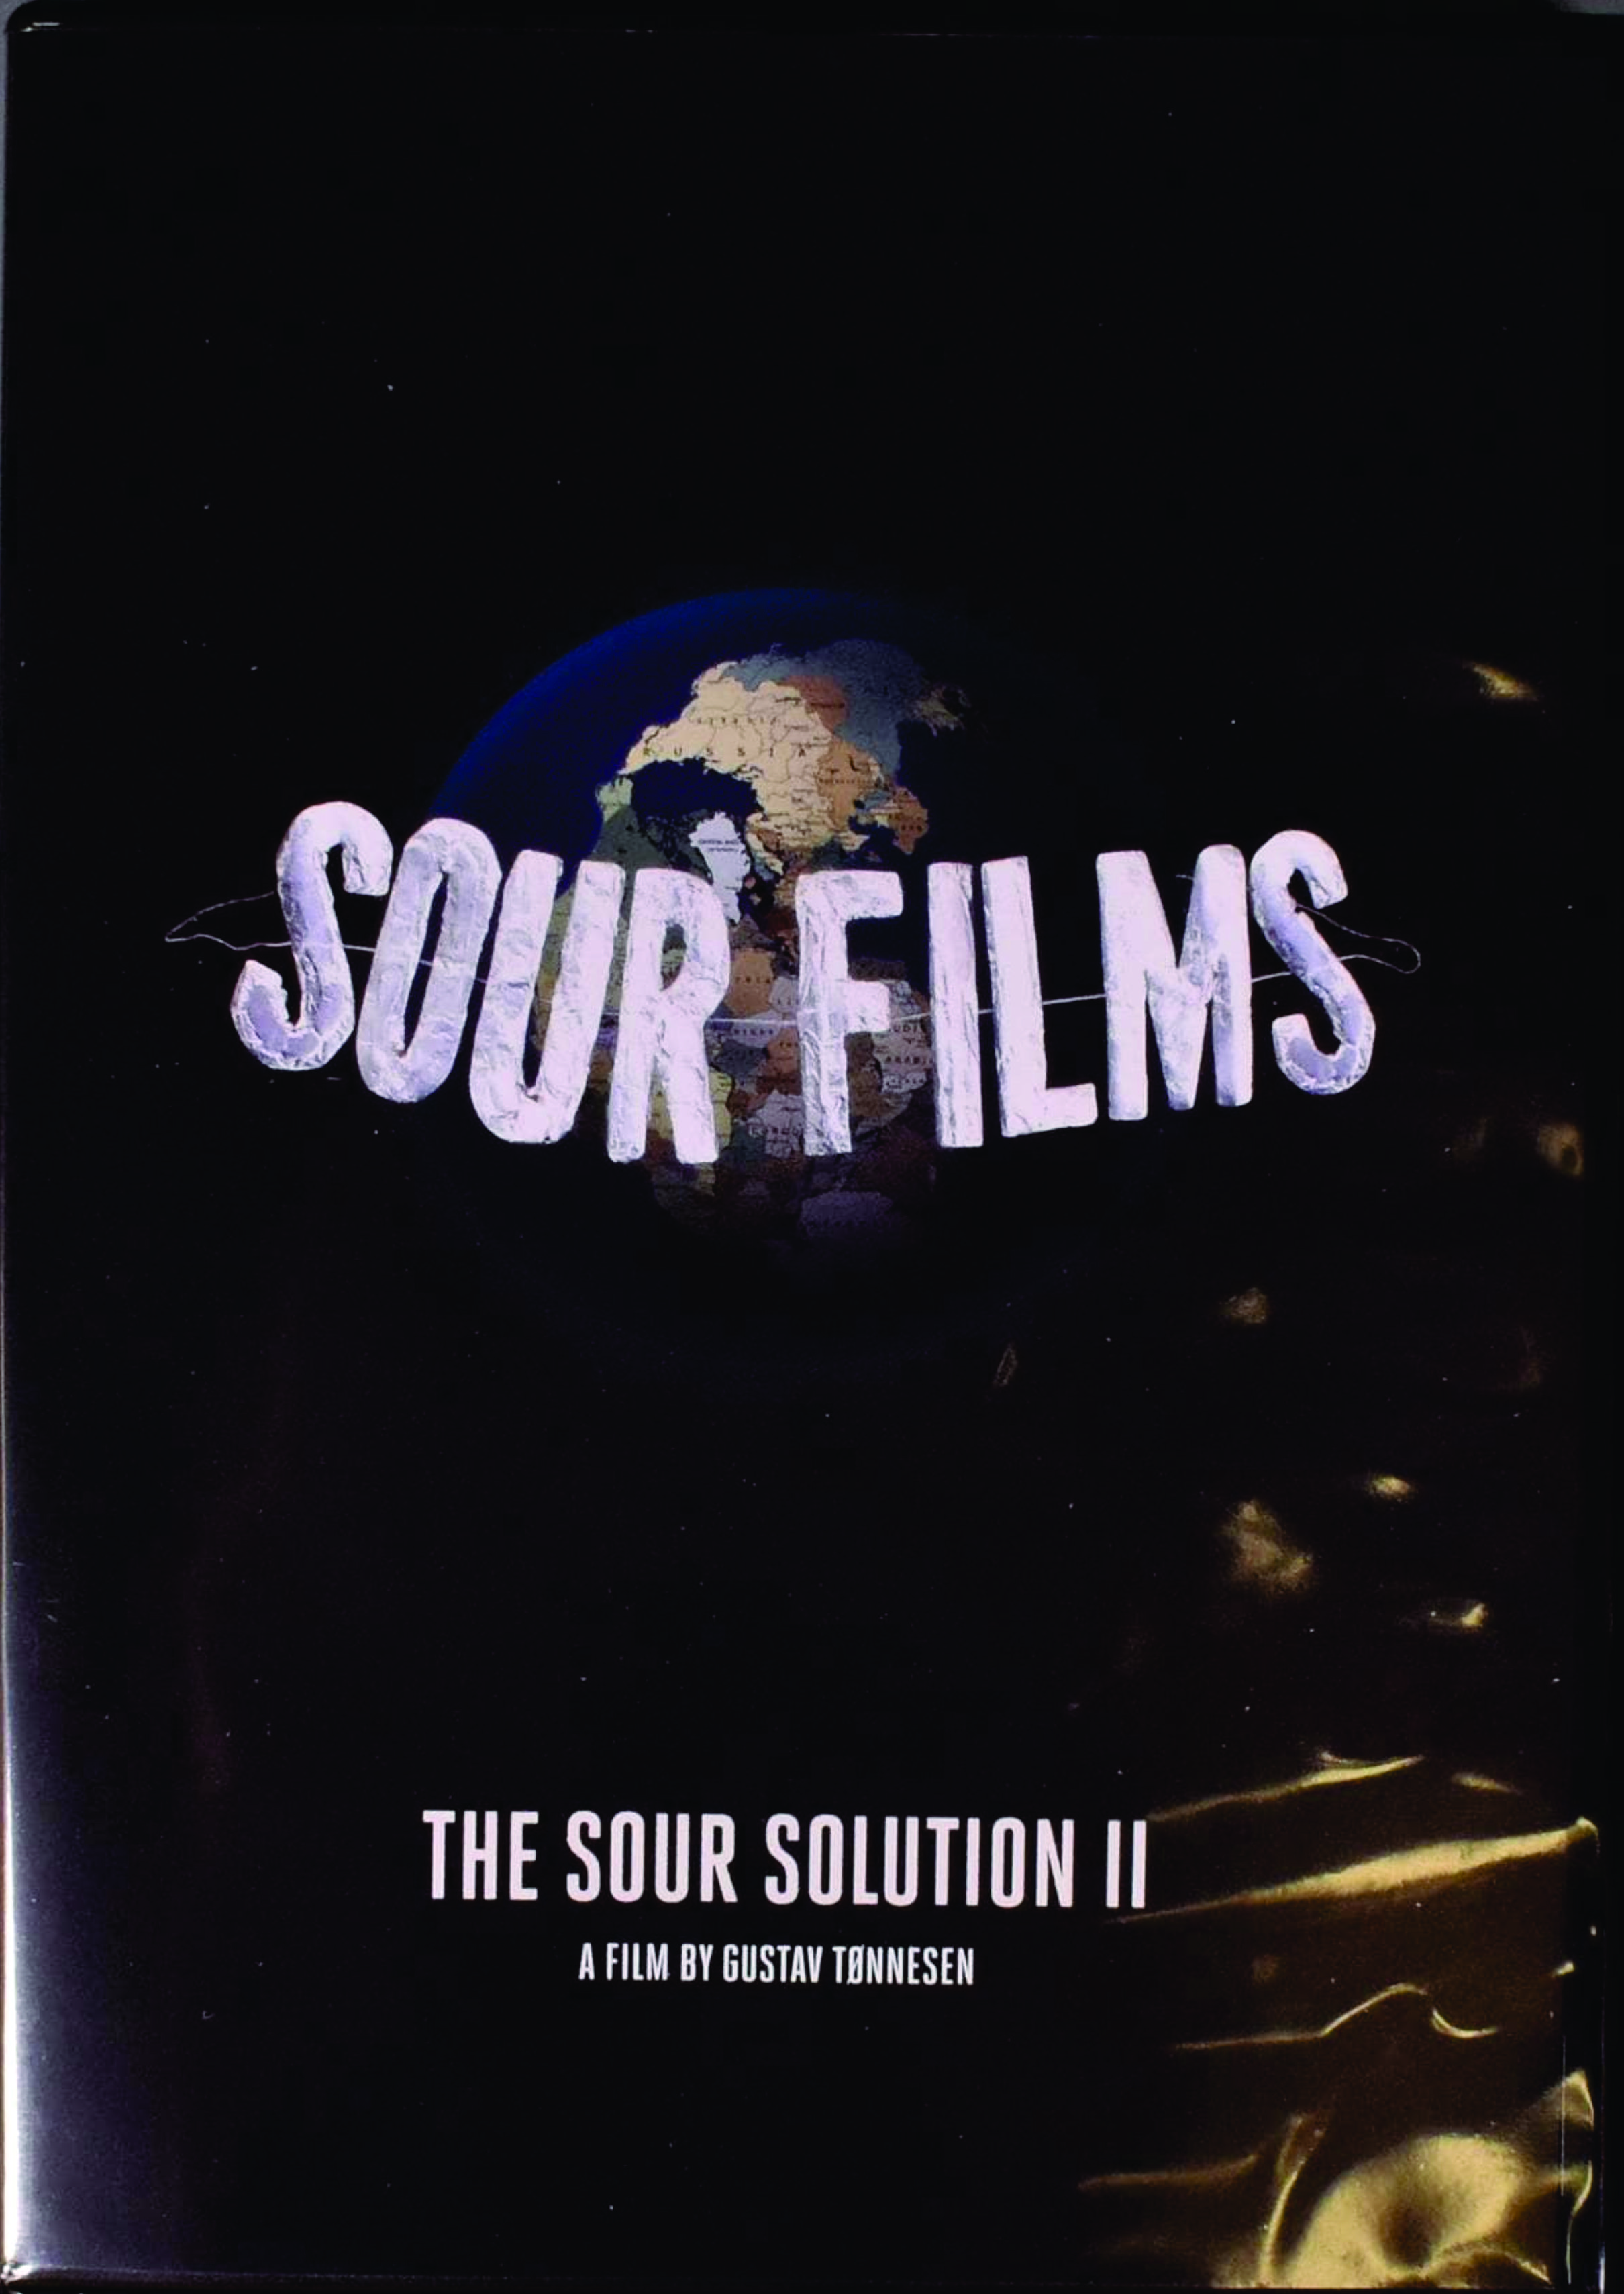 Sour - The Sour Solution II cover art